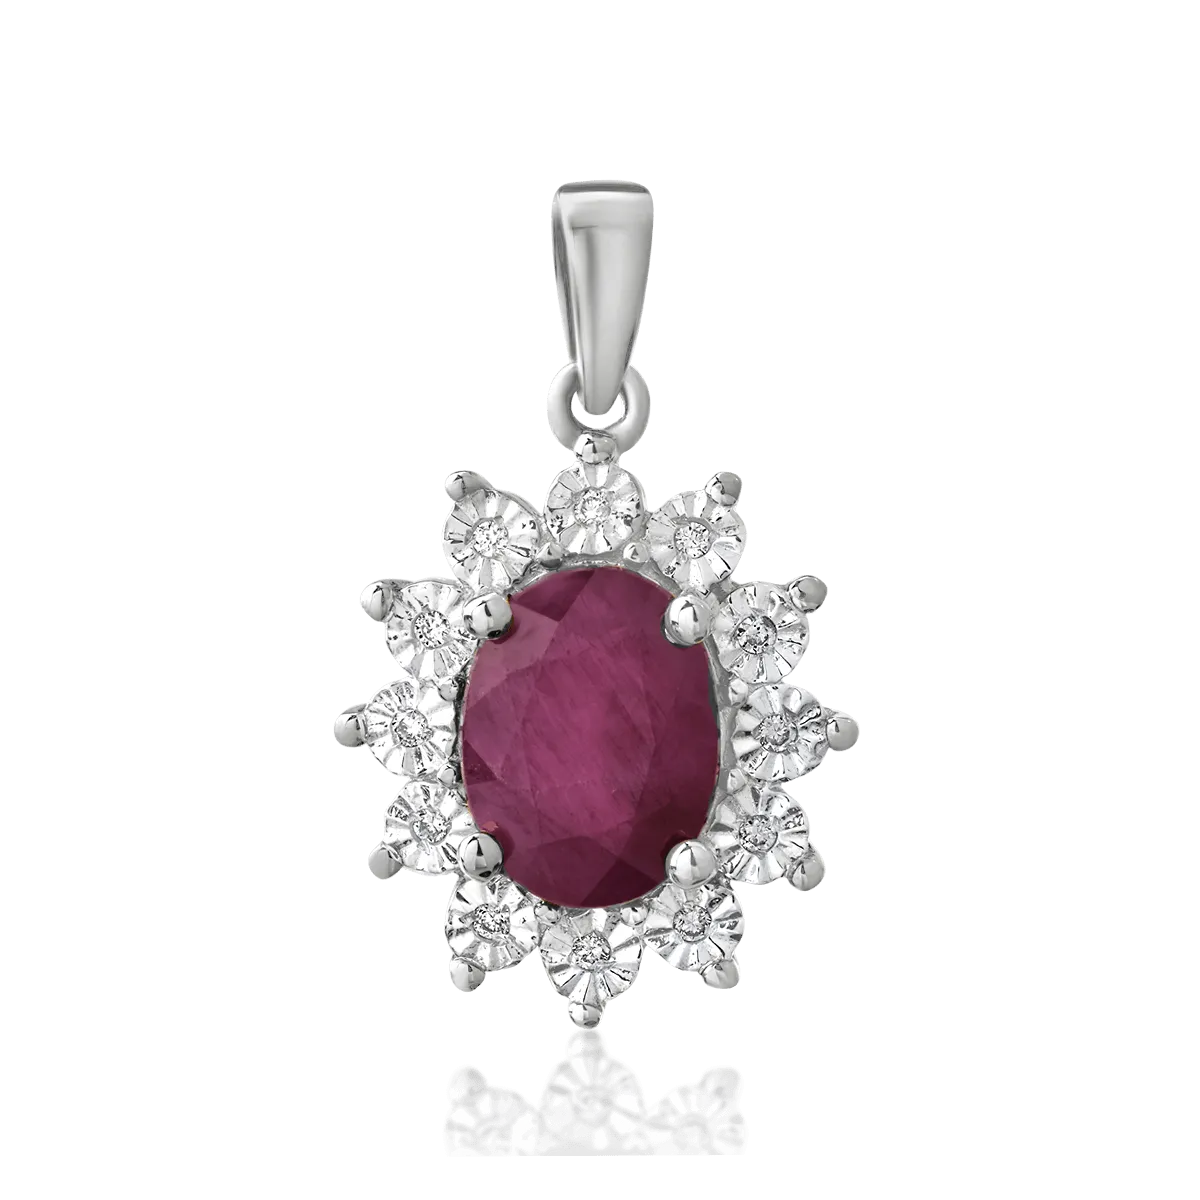 14K white gold pendant with 1.75ct ruby and 0.03ct diamonds